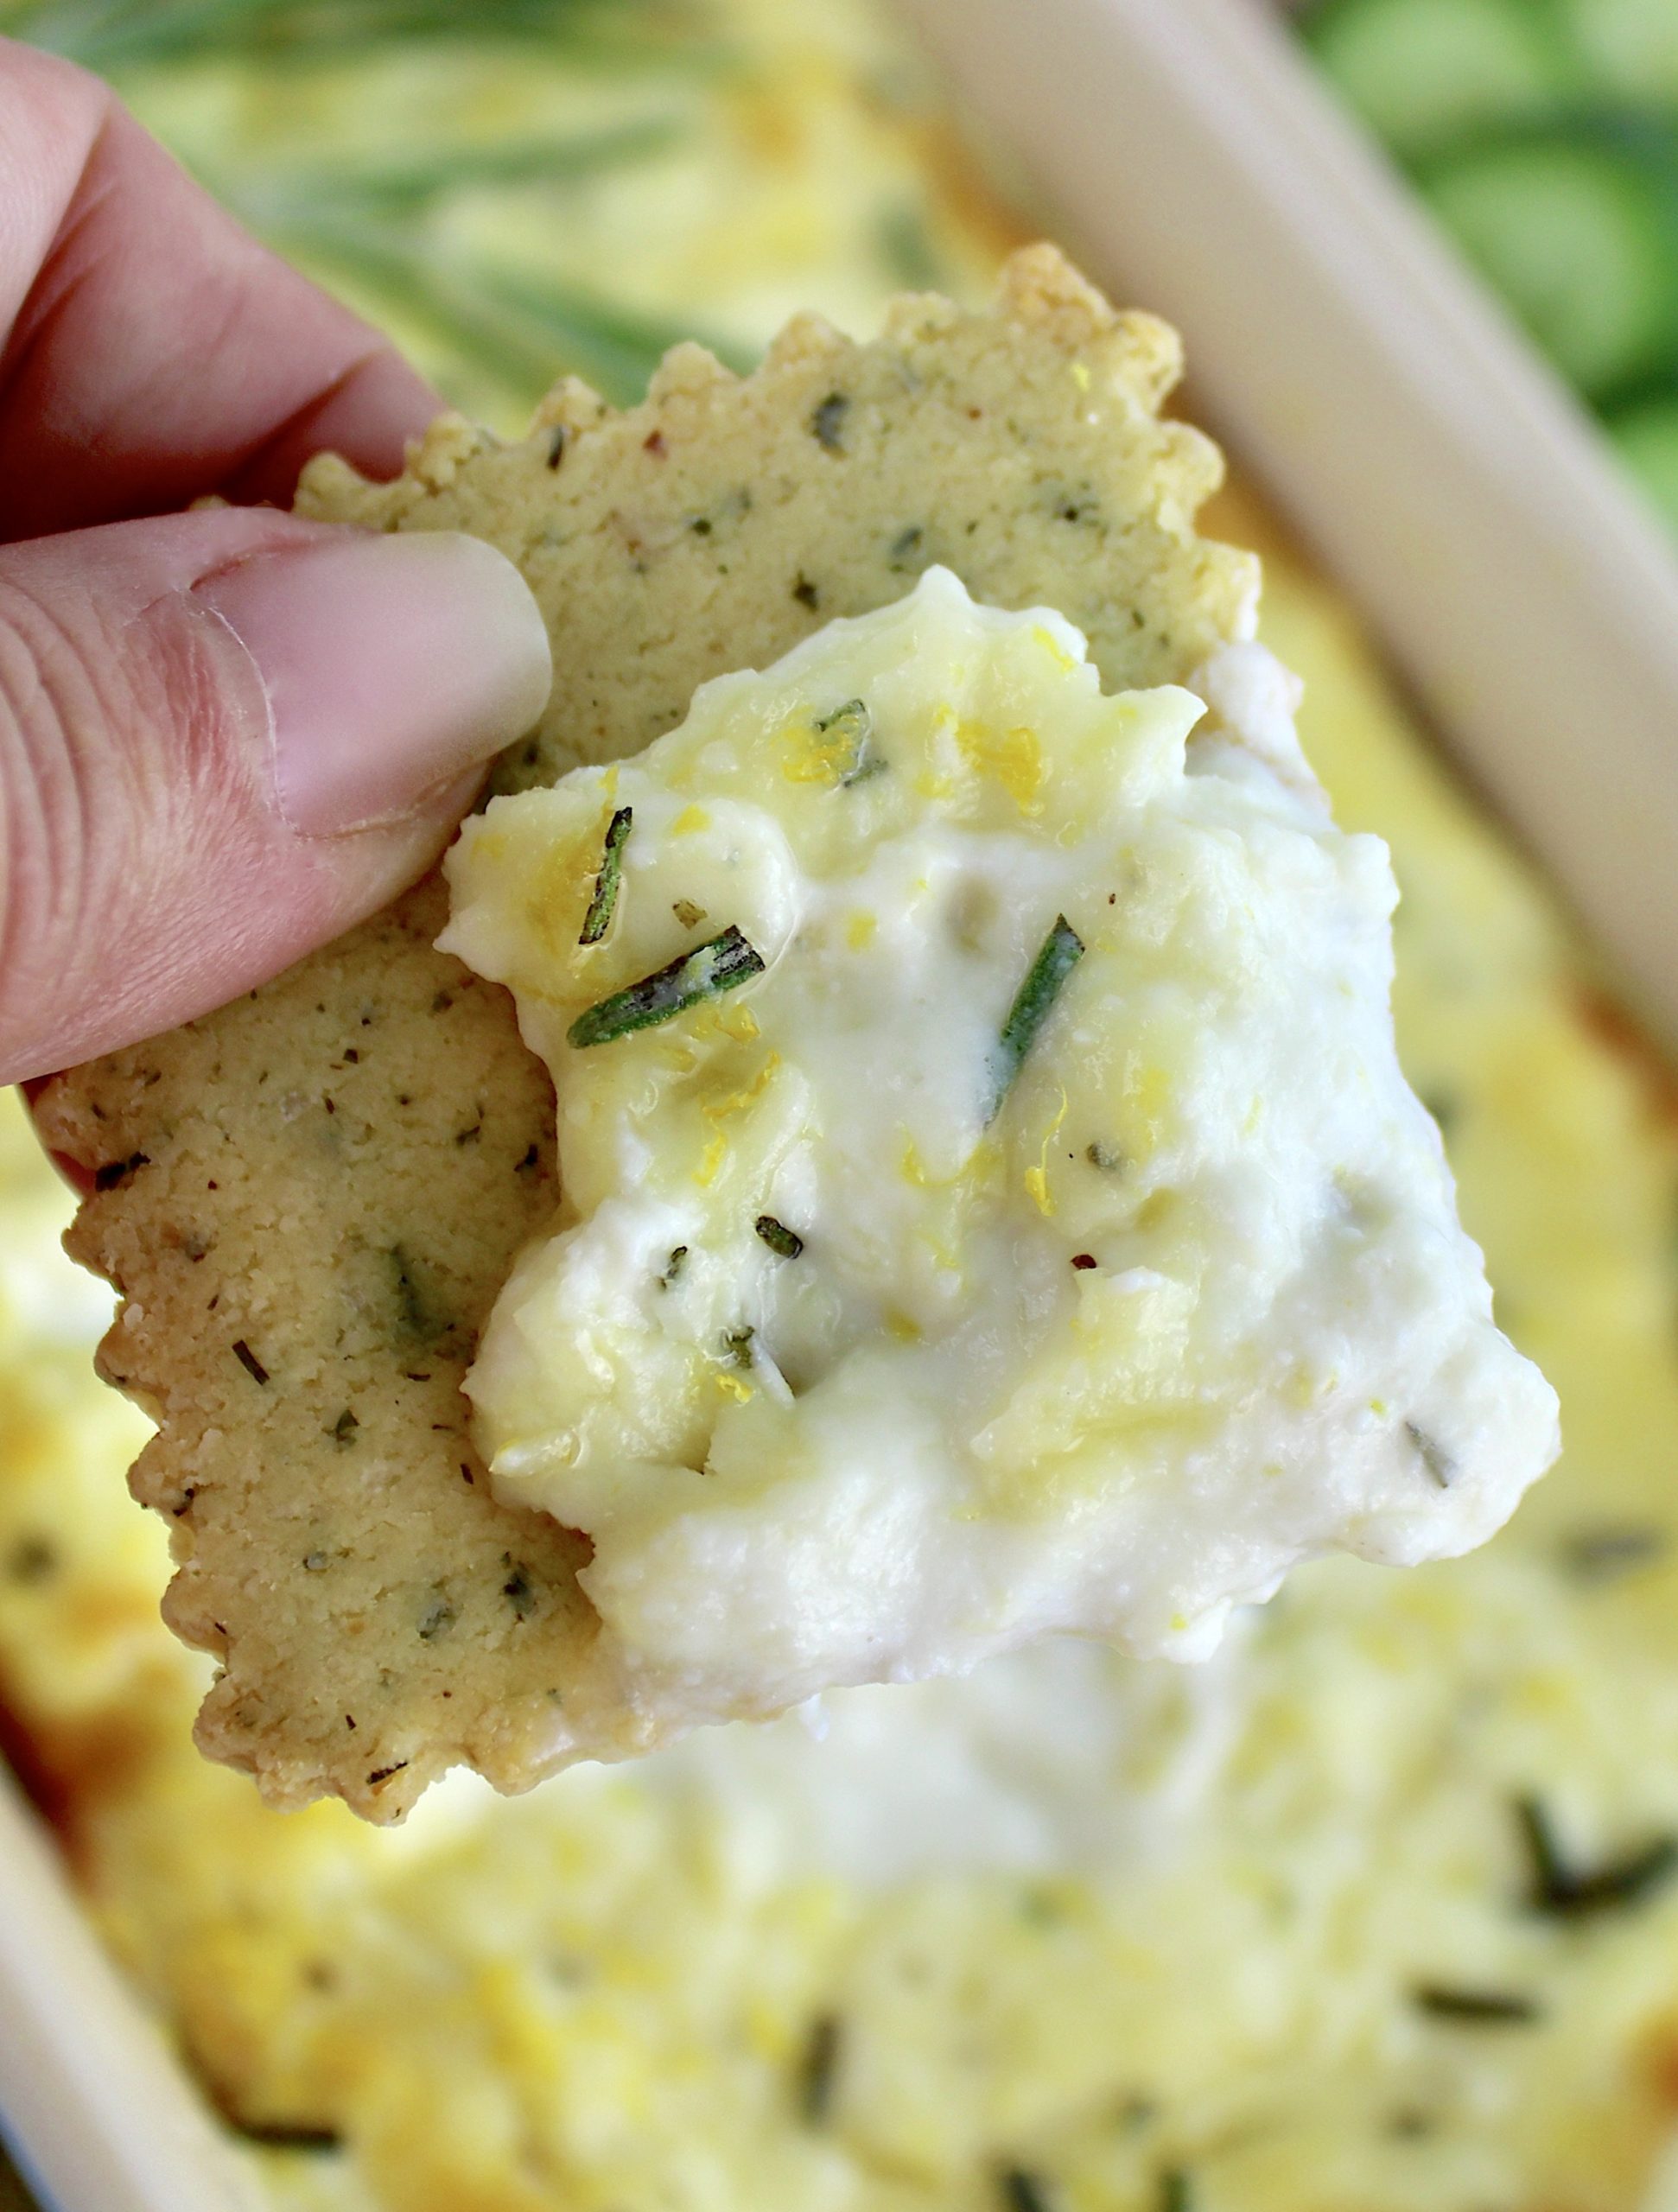 holding up cracker with ricotta dip on top